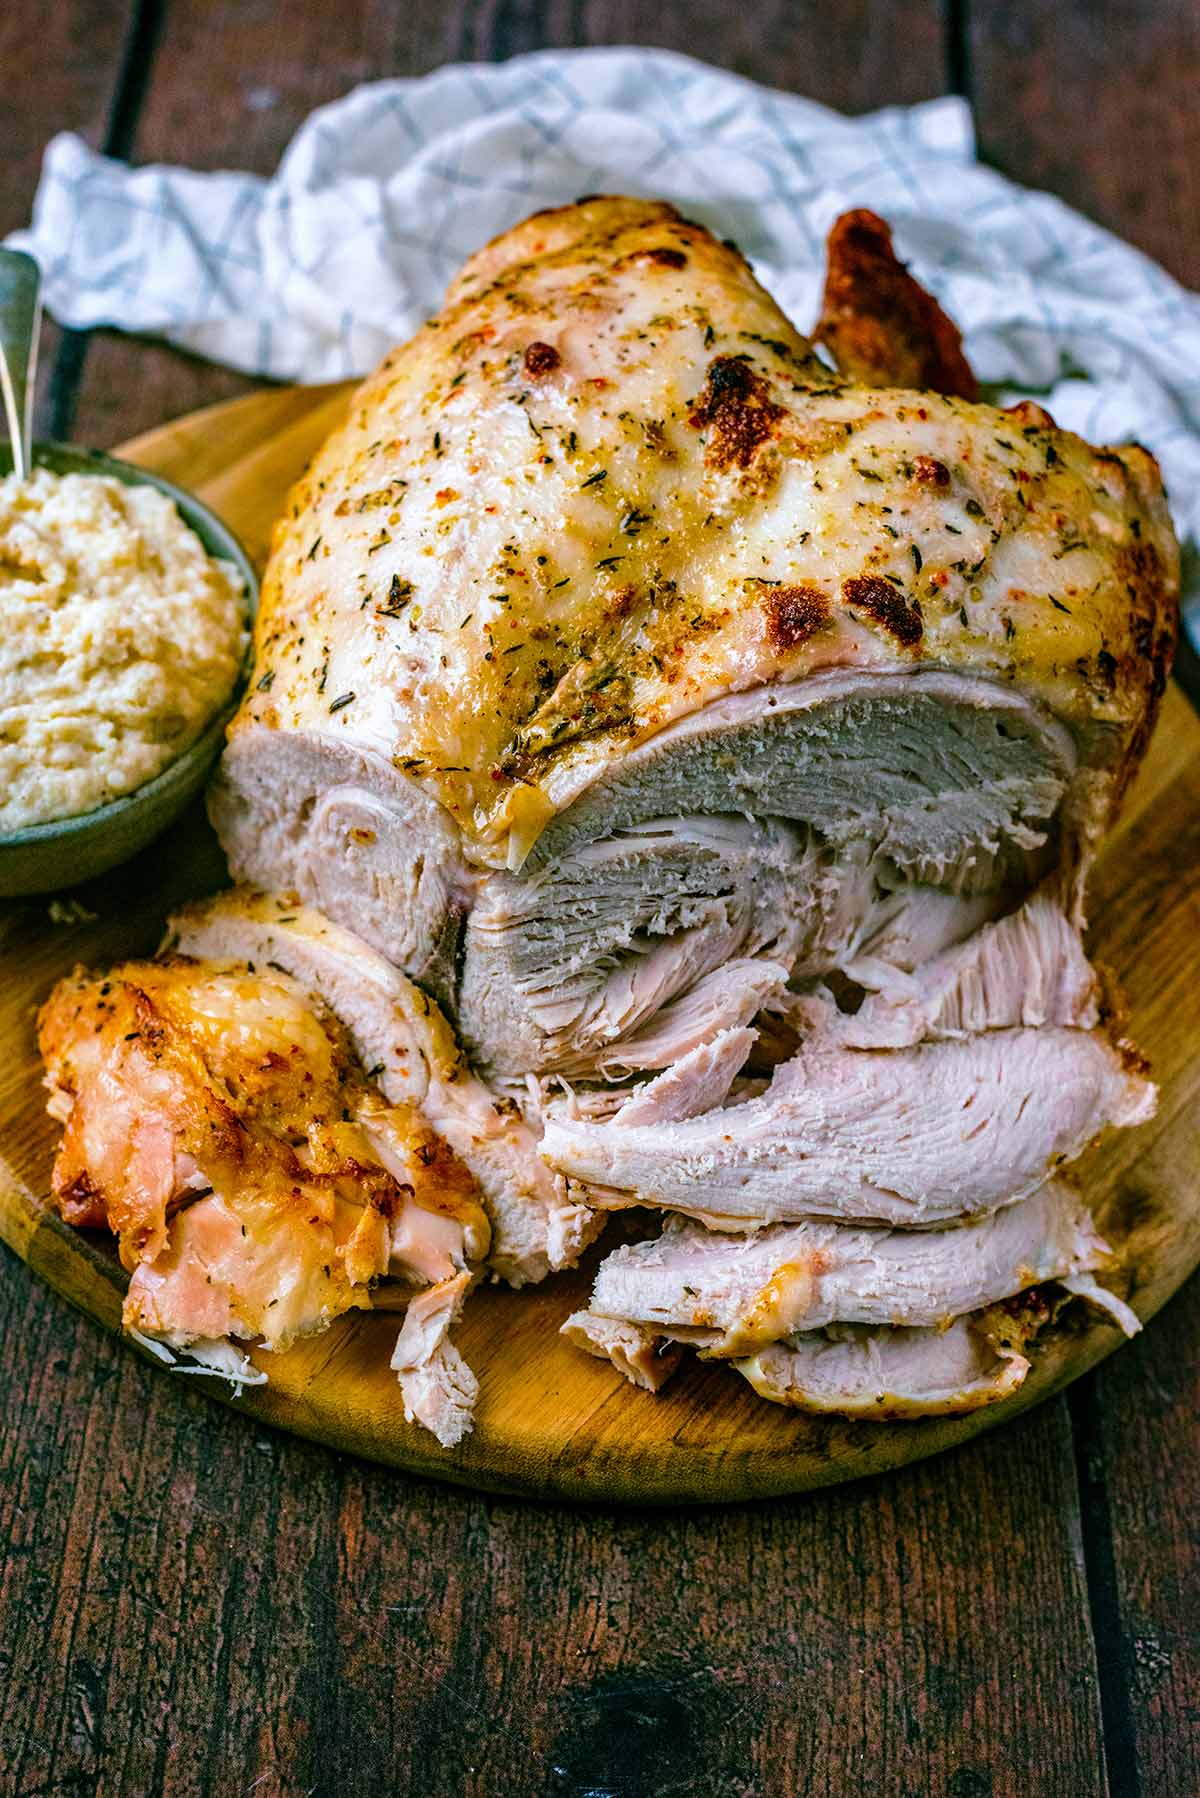 A cooked turkey crown on a wooden board with slices cut off.